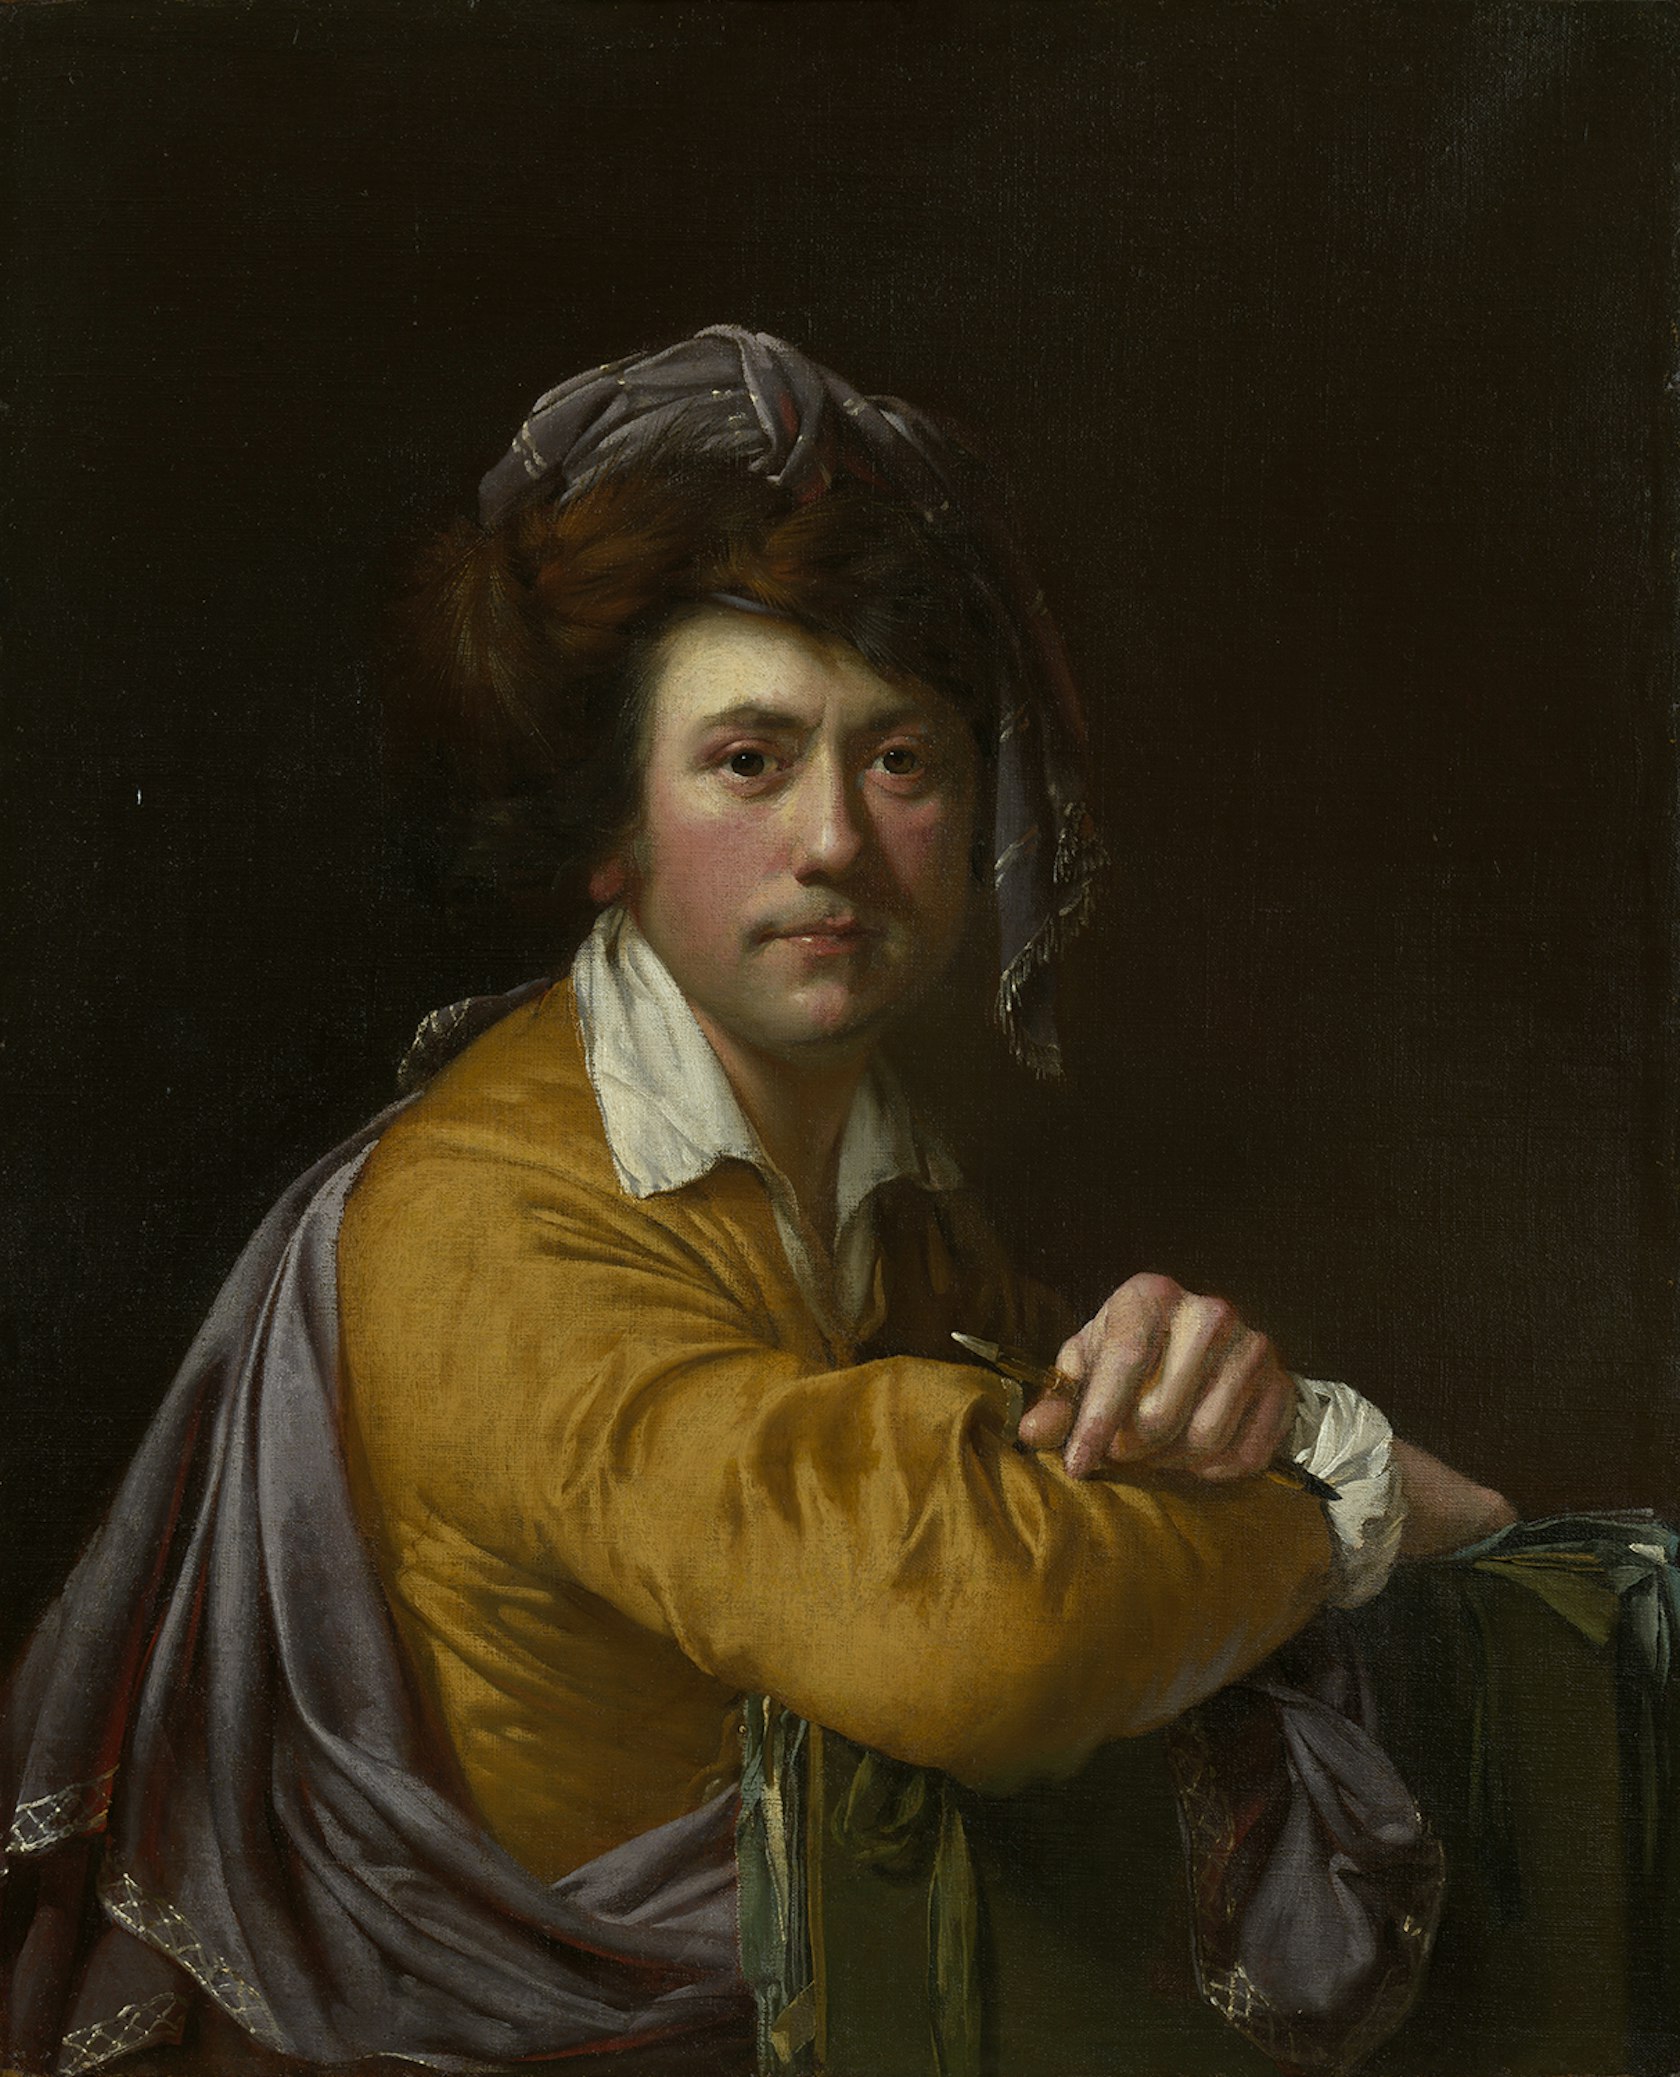 Self-portrait at the age of about forty by Joseph Wright &#8211; oil on canvas c.1772 &#8211; copyright Image Omnia Art Ltd